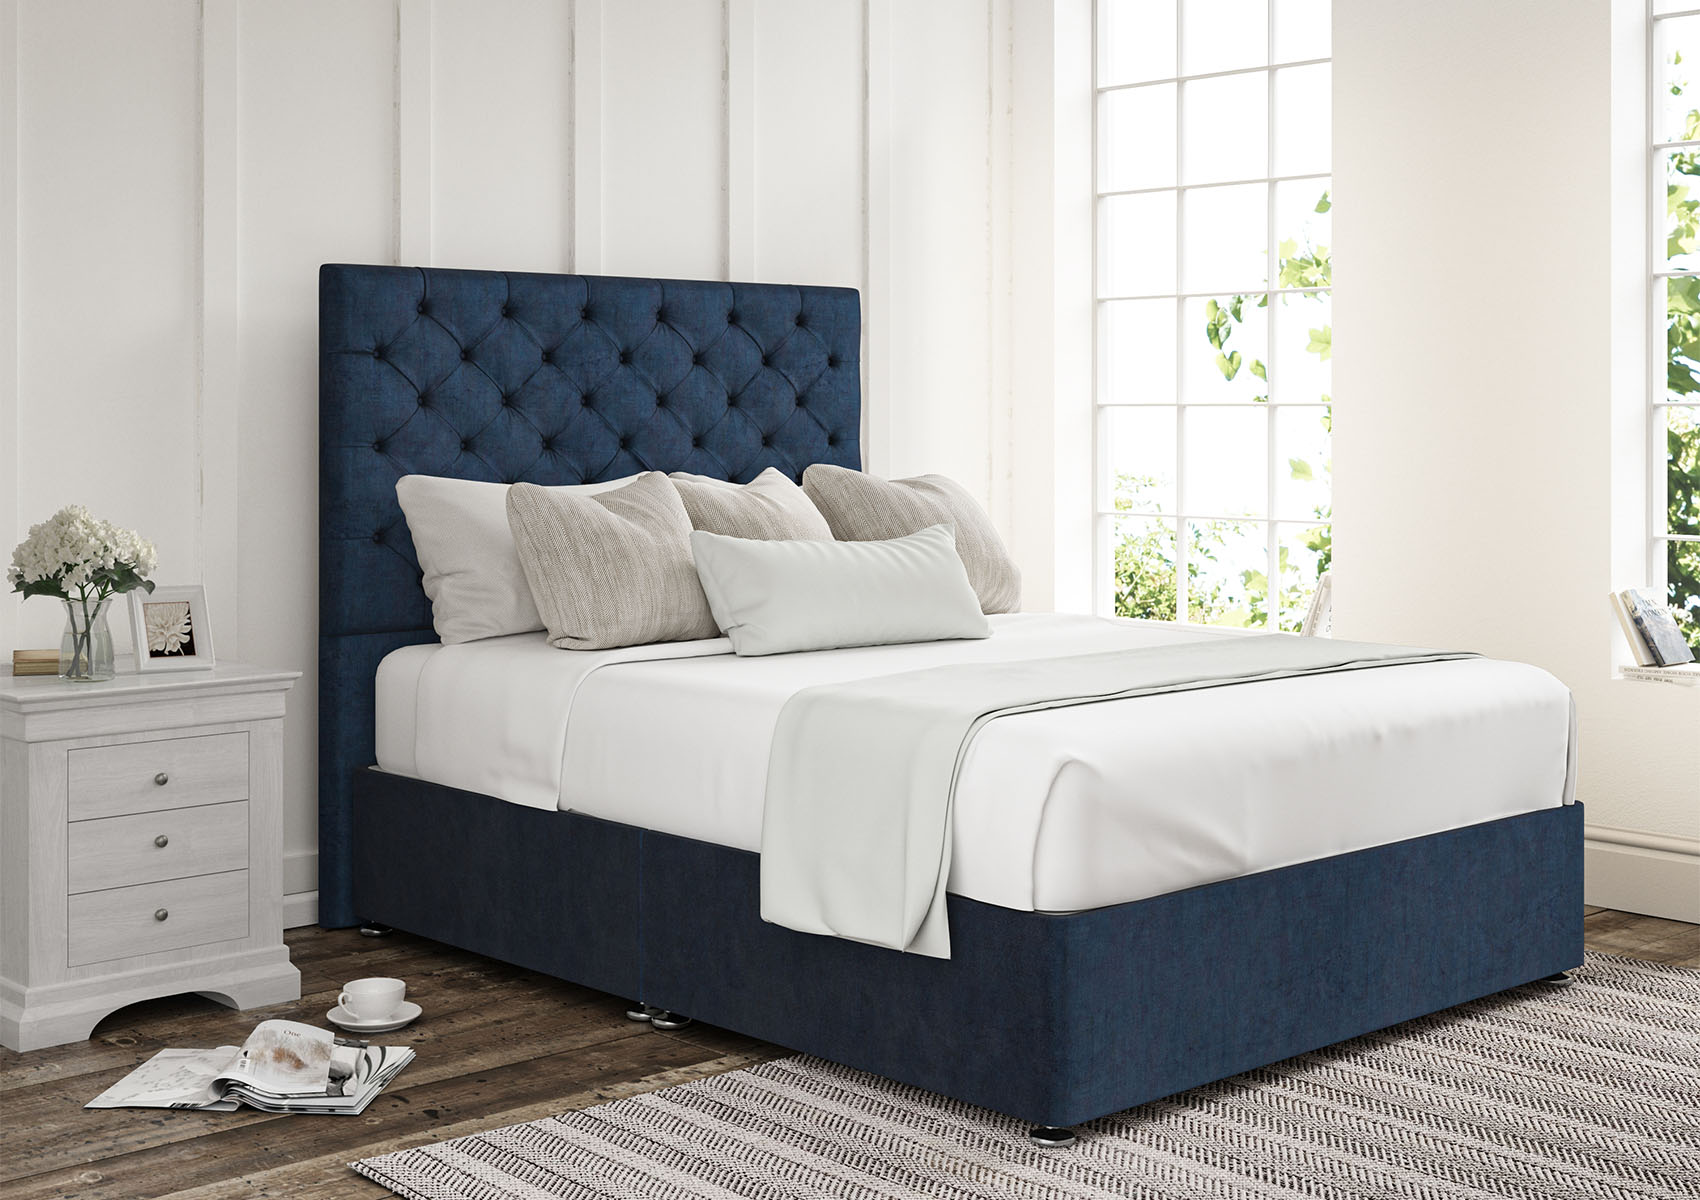 View Chesterfield Carina Parchment Upholstered Super King Divan Bed Time4Sleep information